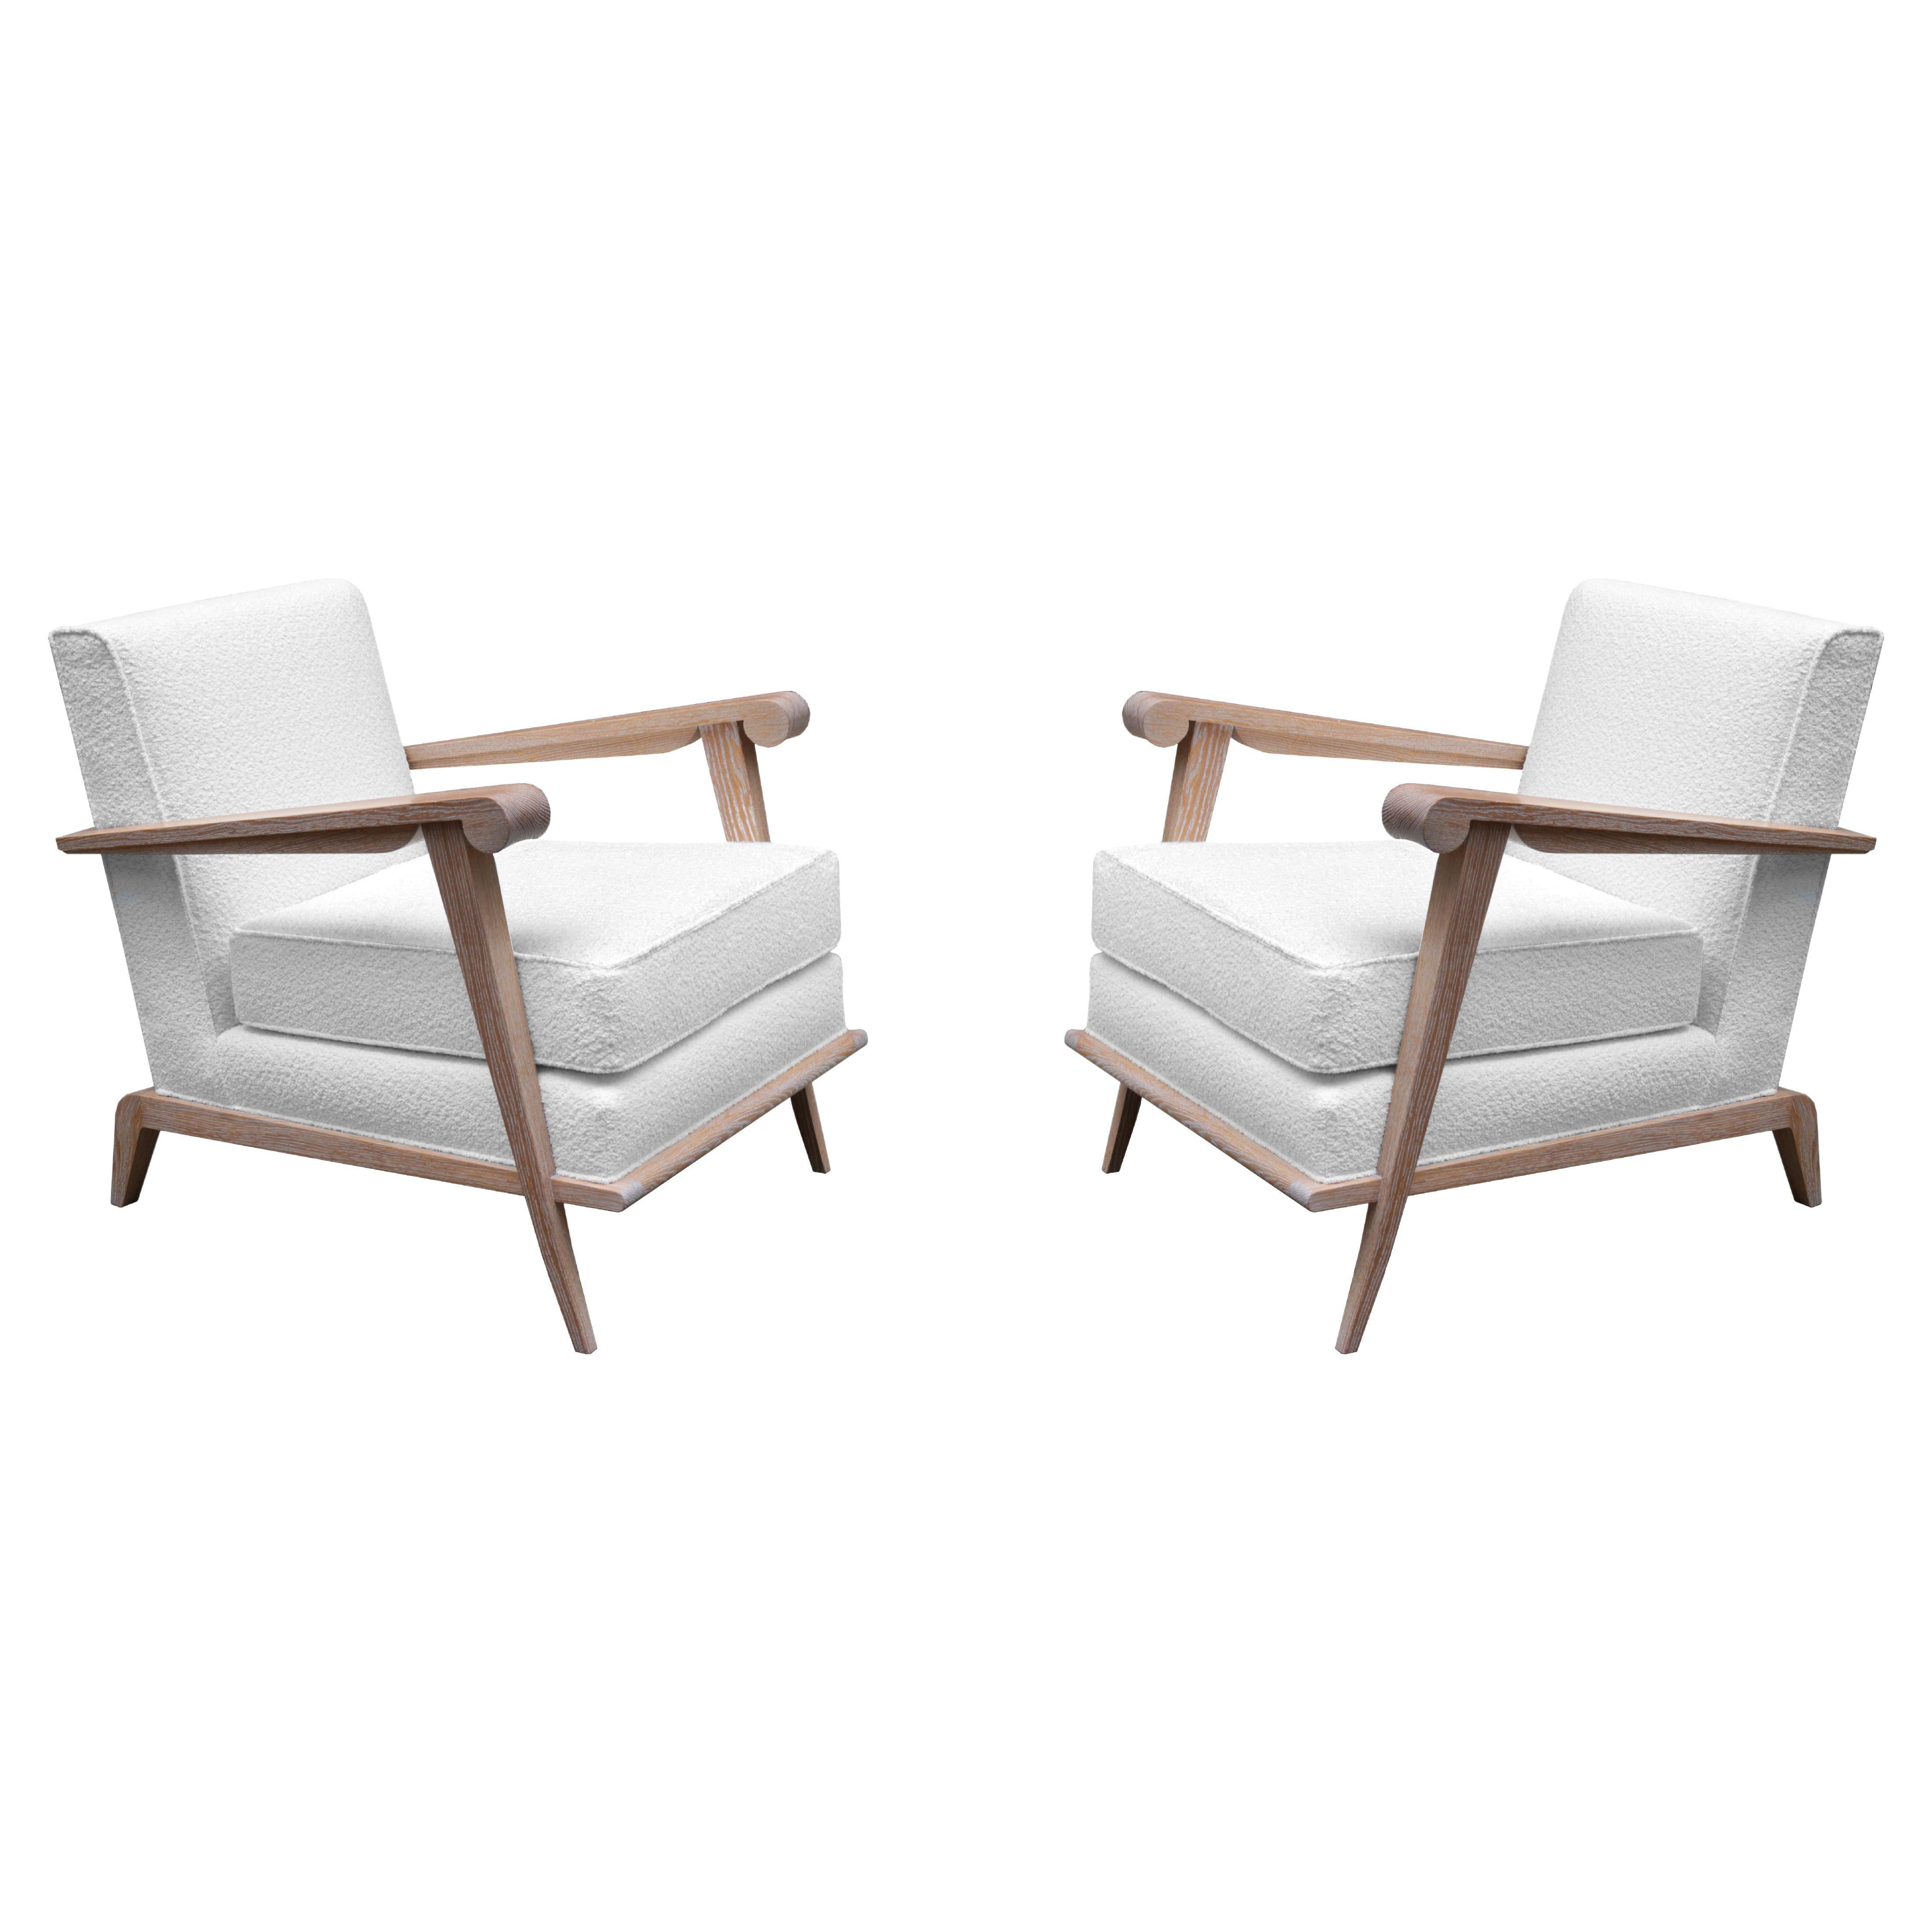 A Pair of Contemporary French Modernist Style Armchairs 